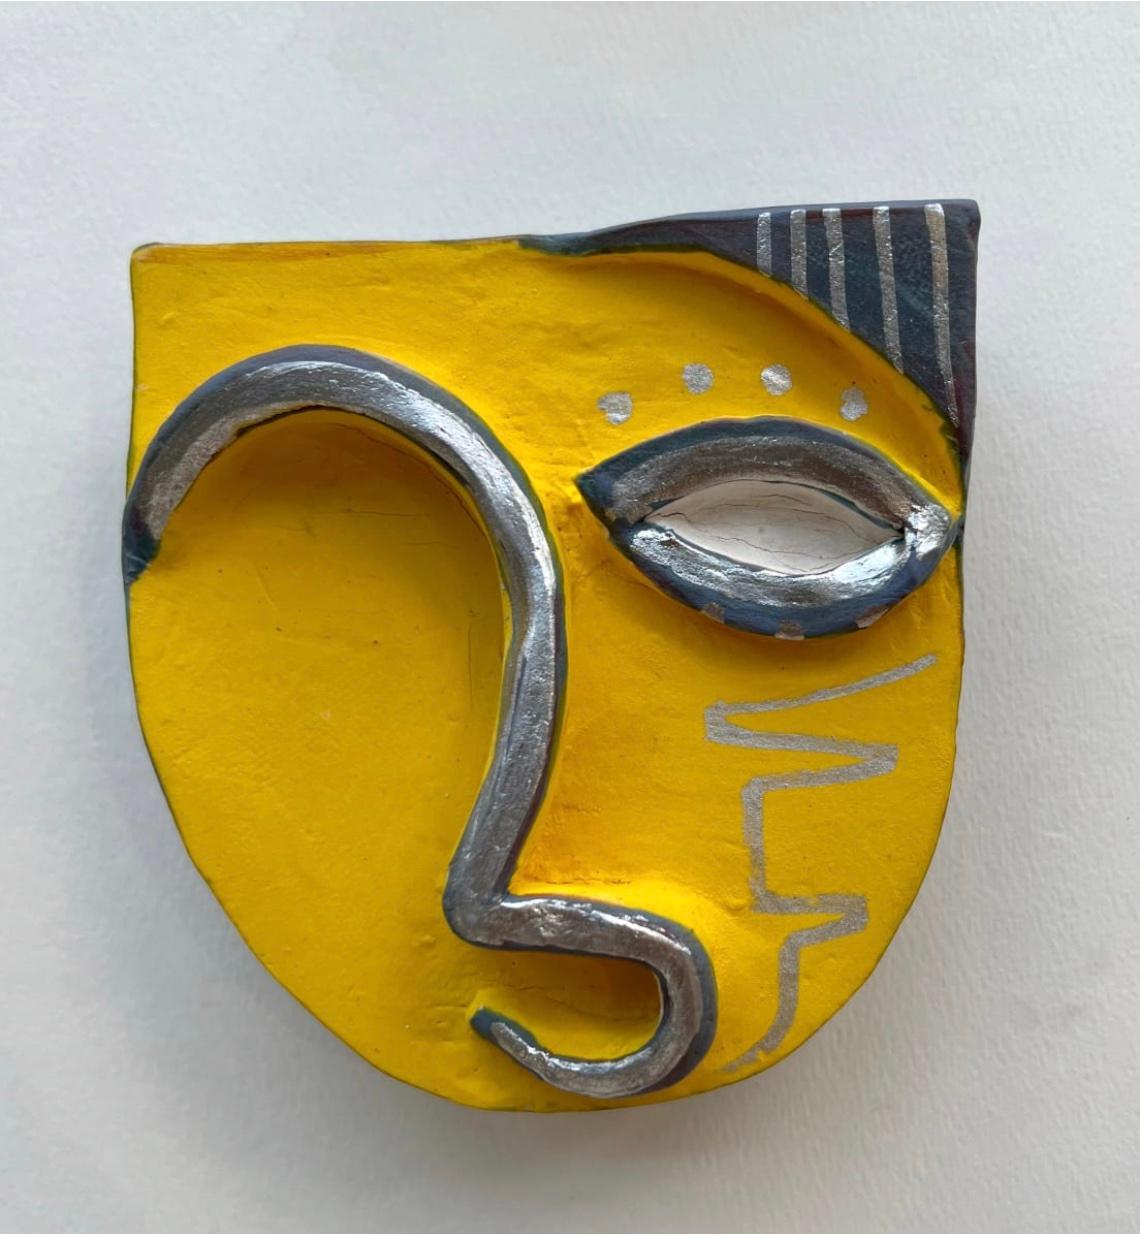 Clay sculpture of a mask, with the outline of the eyes, mouth and hair painted in yellow, silver and gray. 

Unique one of a kind painting signed by the artist. 

ARTIST BIO 
Alice Mizrachi is a New York based interdisciplinary artist and educator